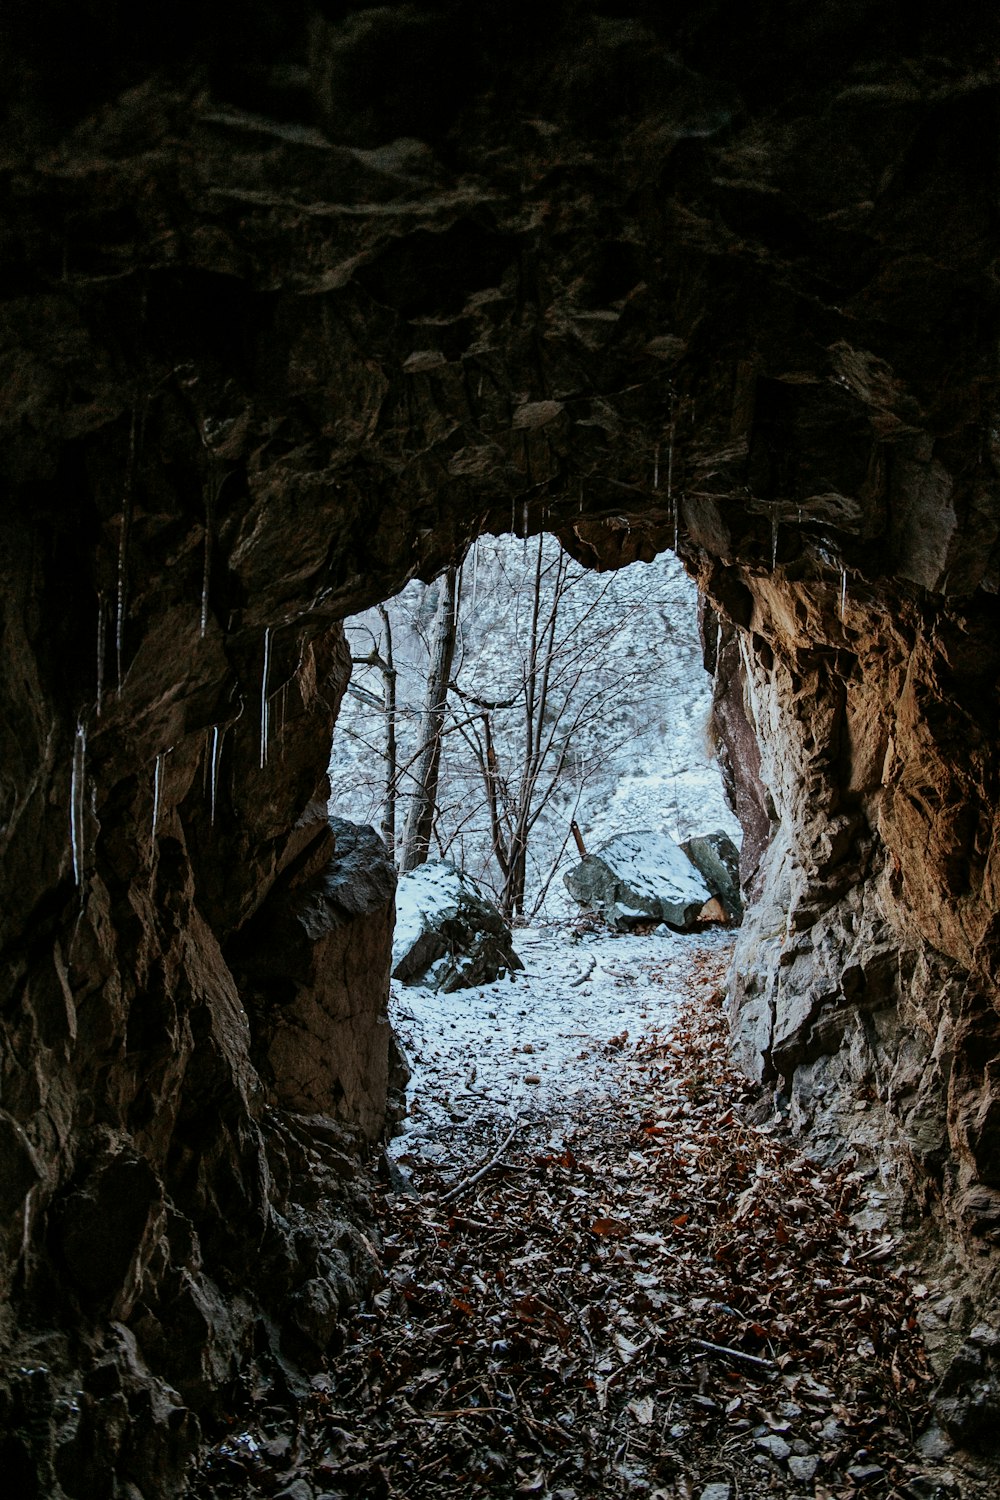 a cave entrance with trees and leaves on the ground